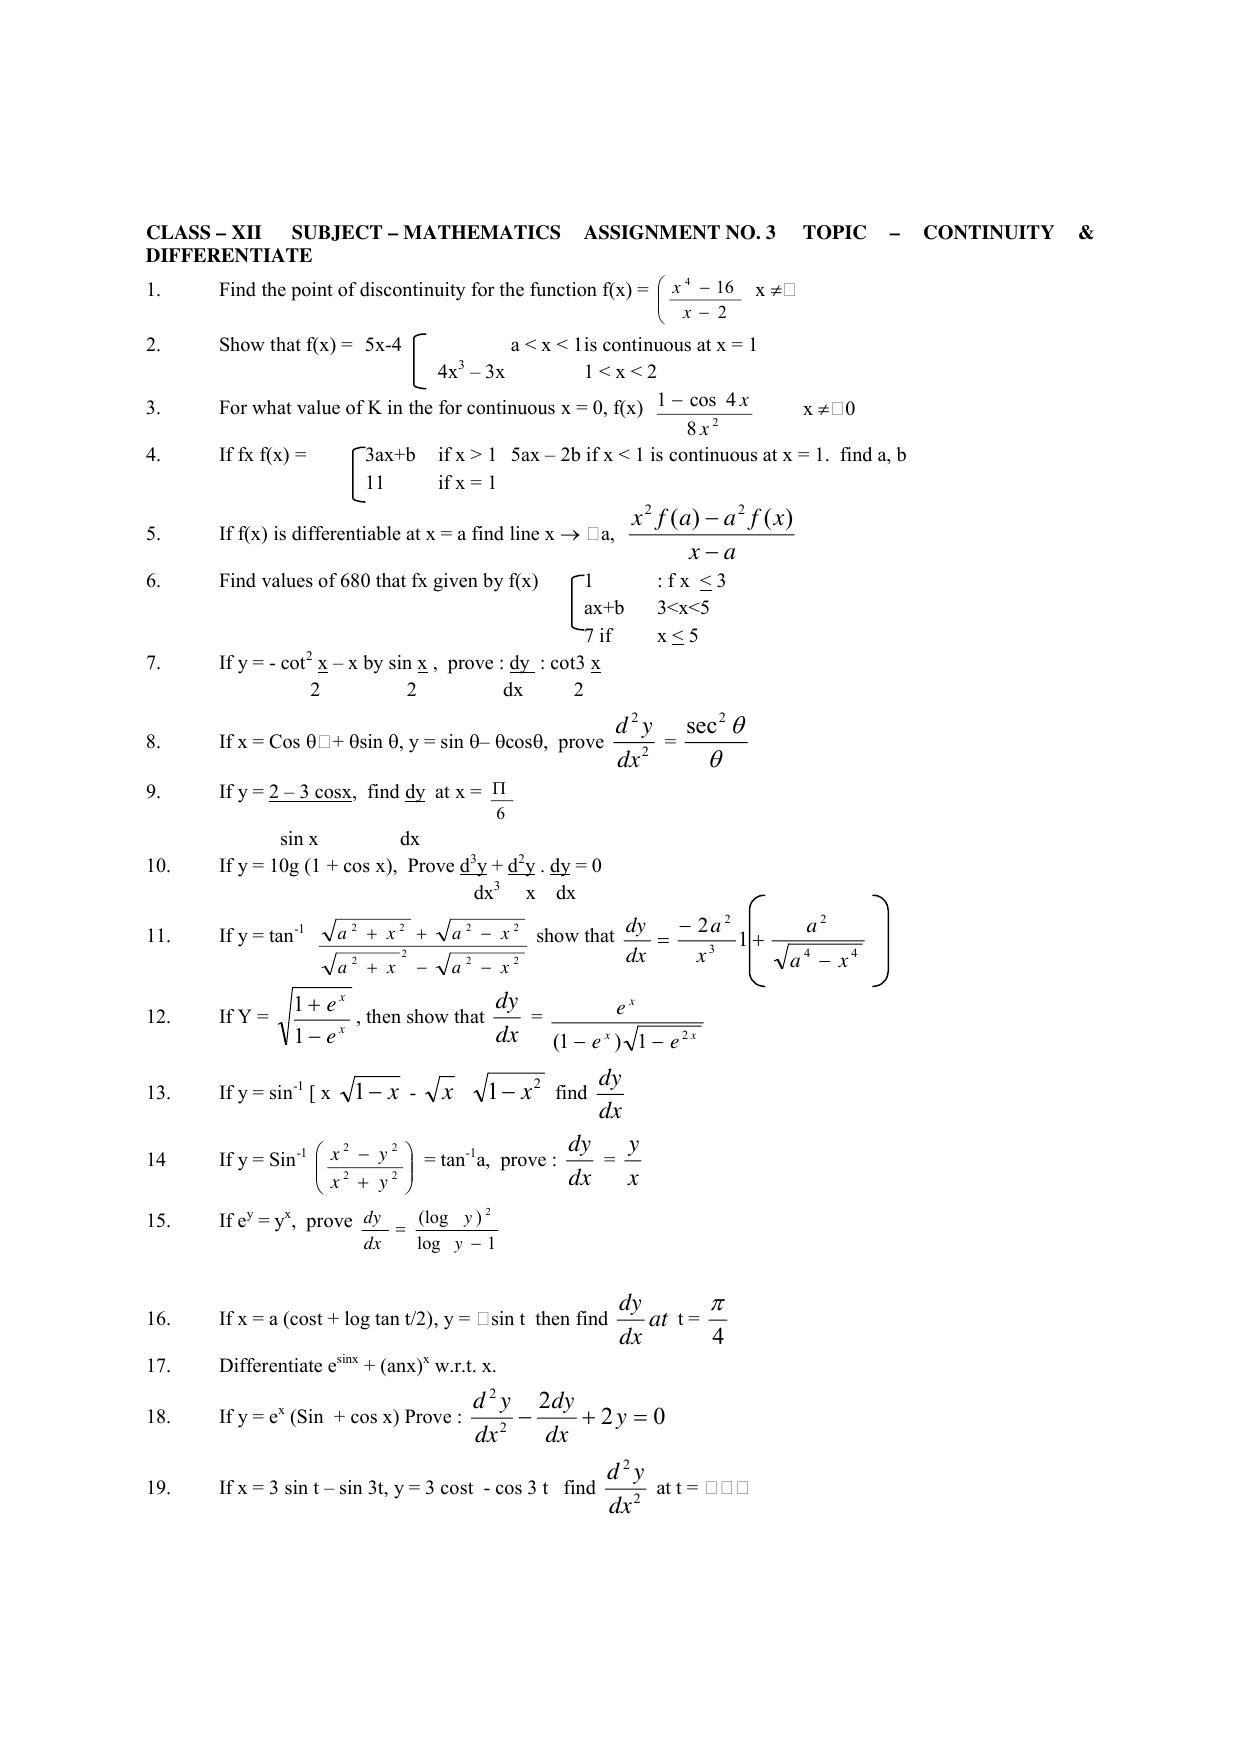 CBSE Class 12 Maths Continuity and Differentiability Assignment 02 - Page 1